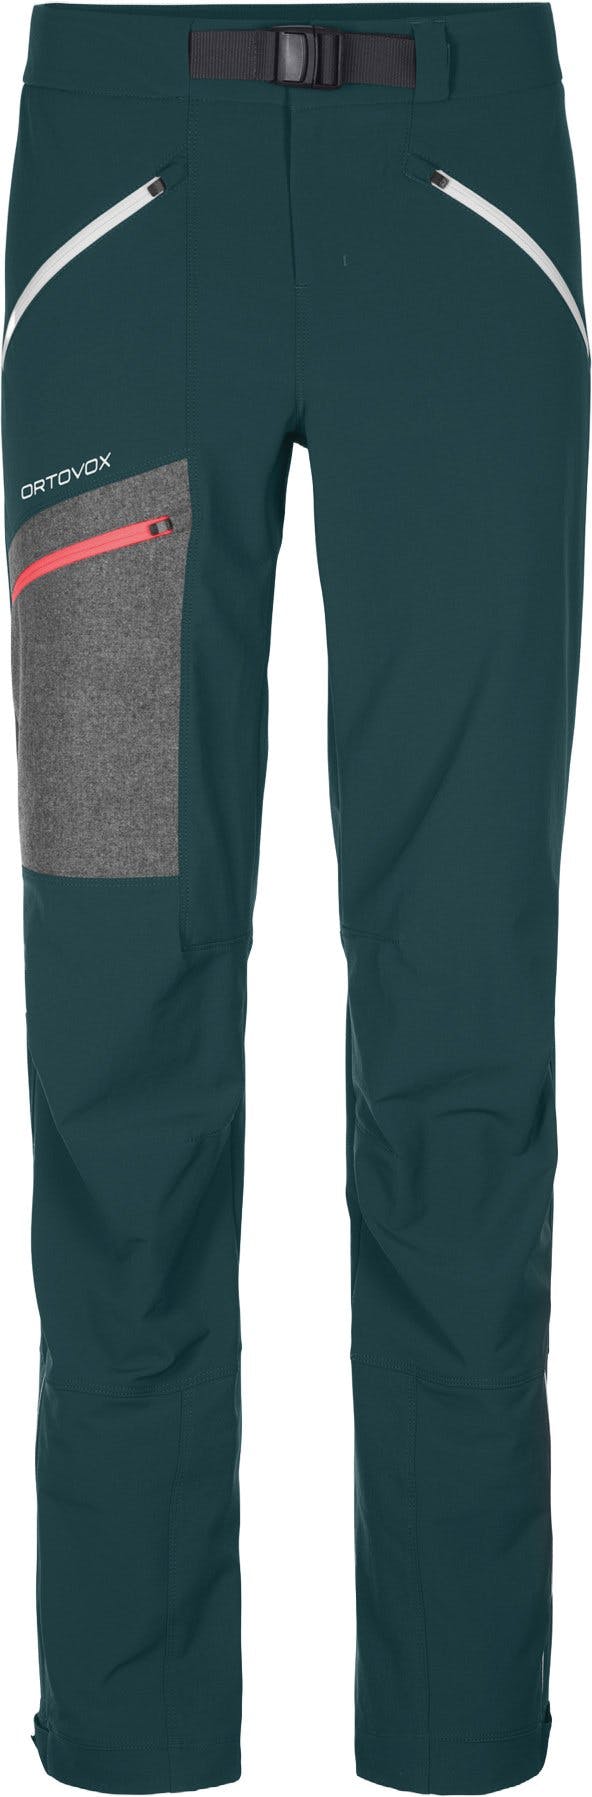 Product image for Cevedale Softshell Pants - Women's